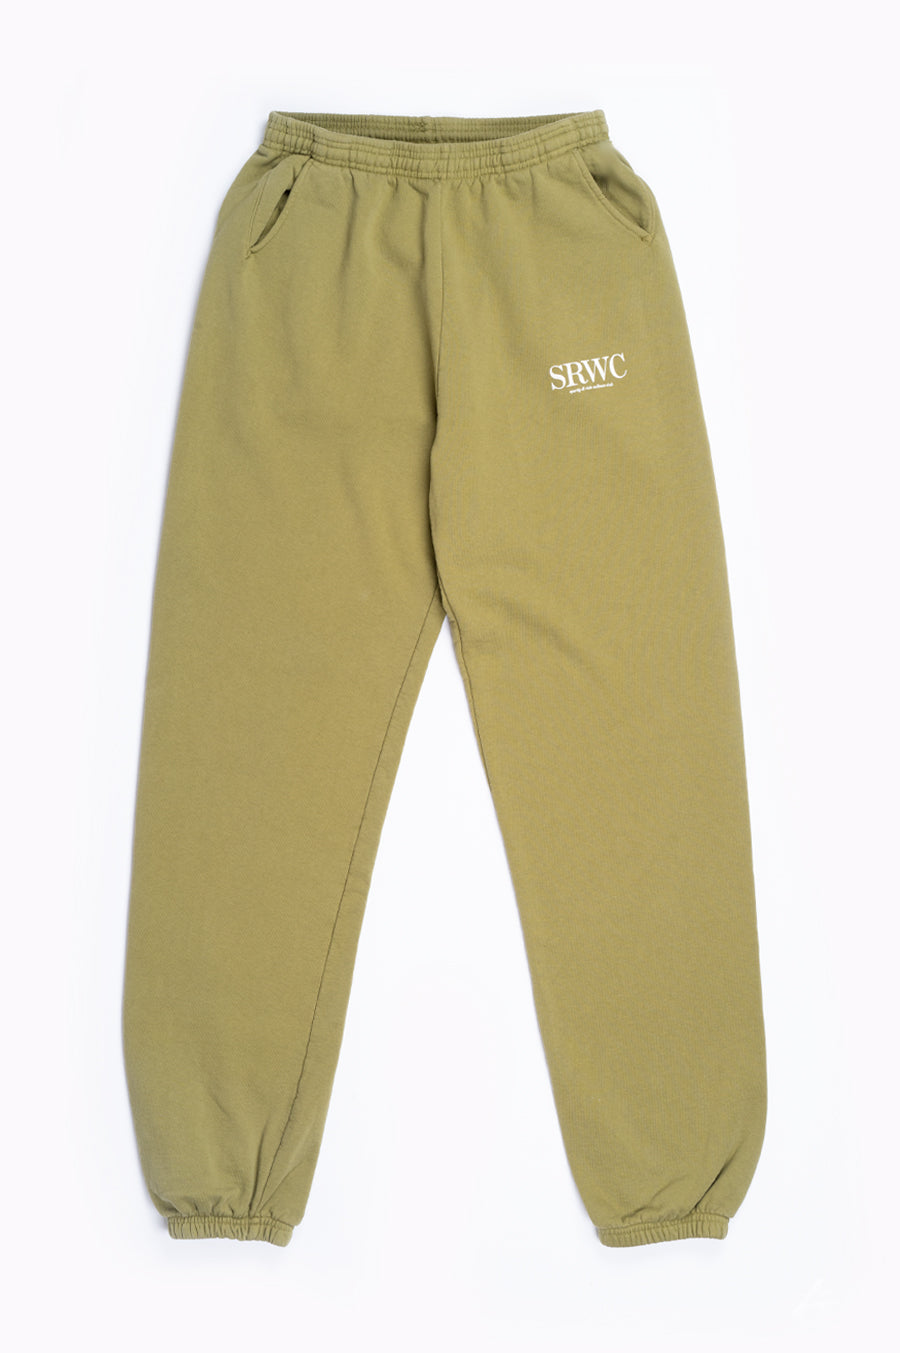 SPORTY AND RICH UPPER EAST SIDE SWEATPANTS OLIVE